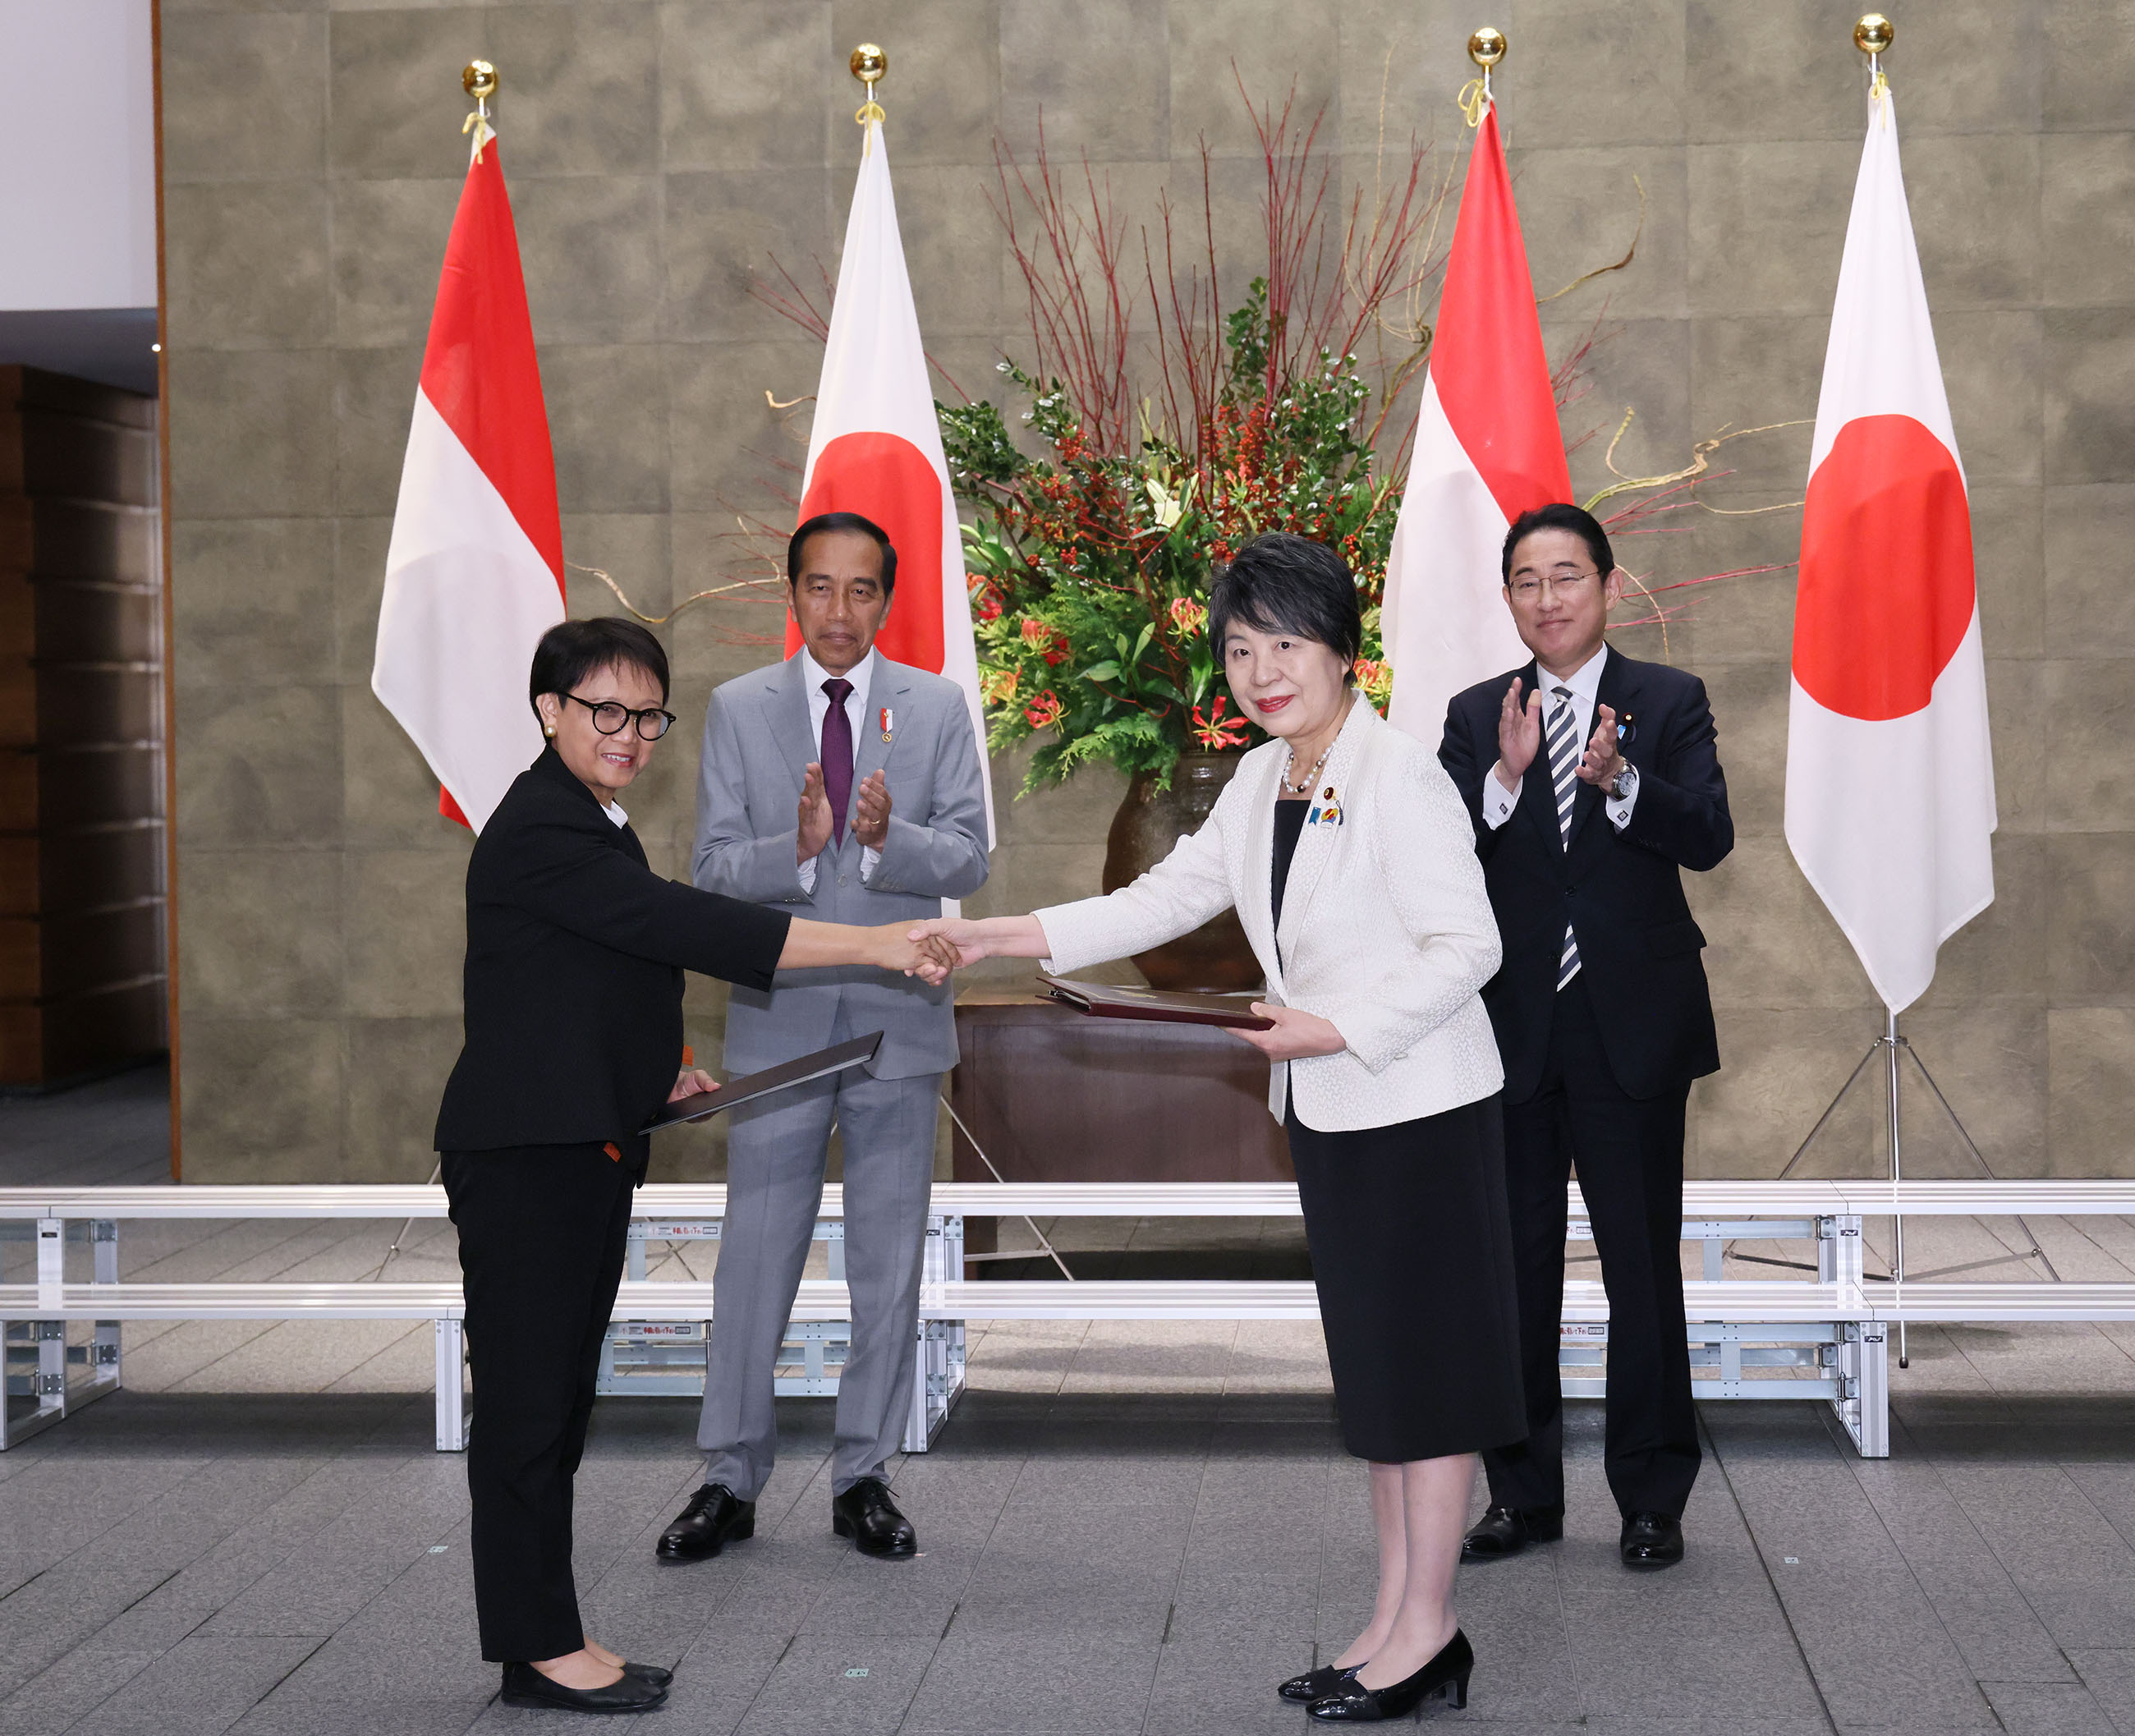 Exchange of notes ceremony with Indonesia